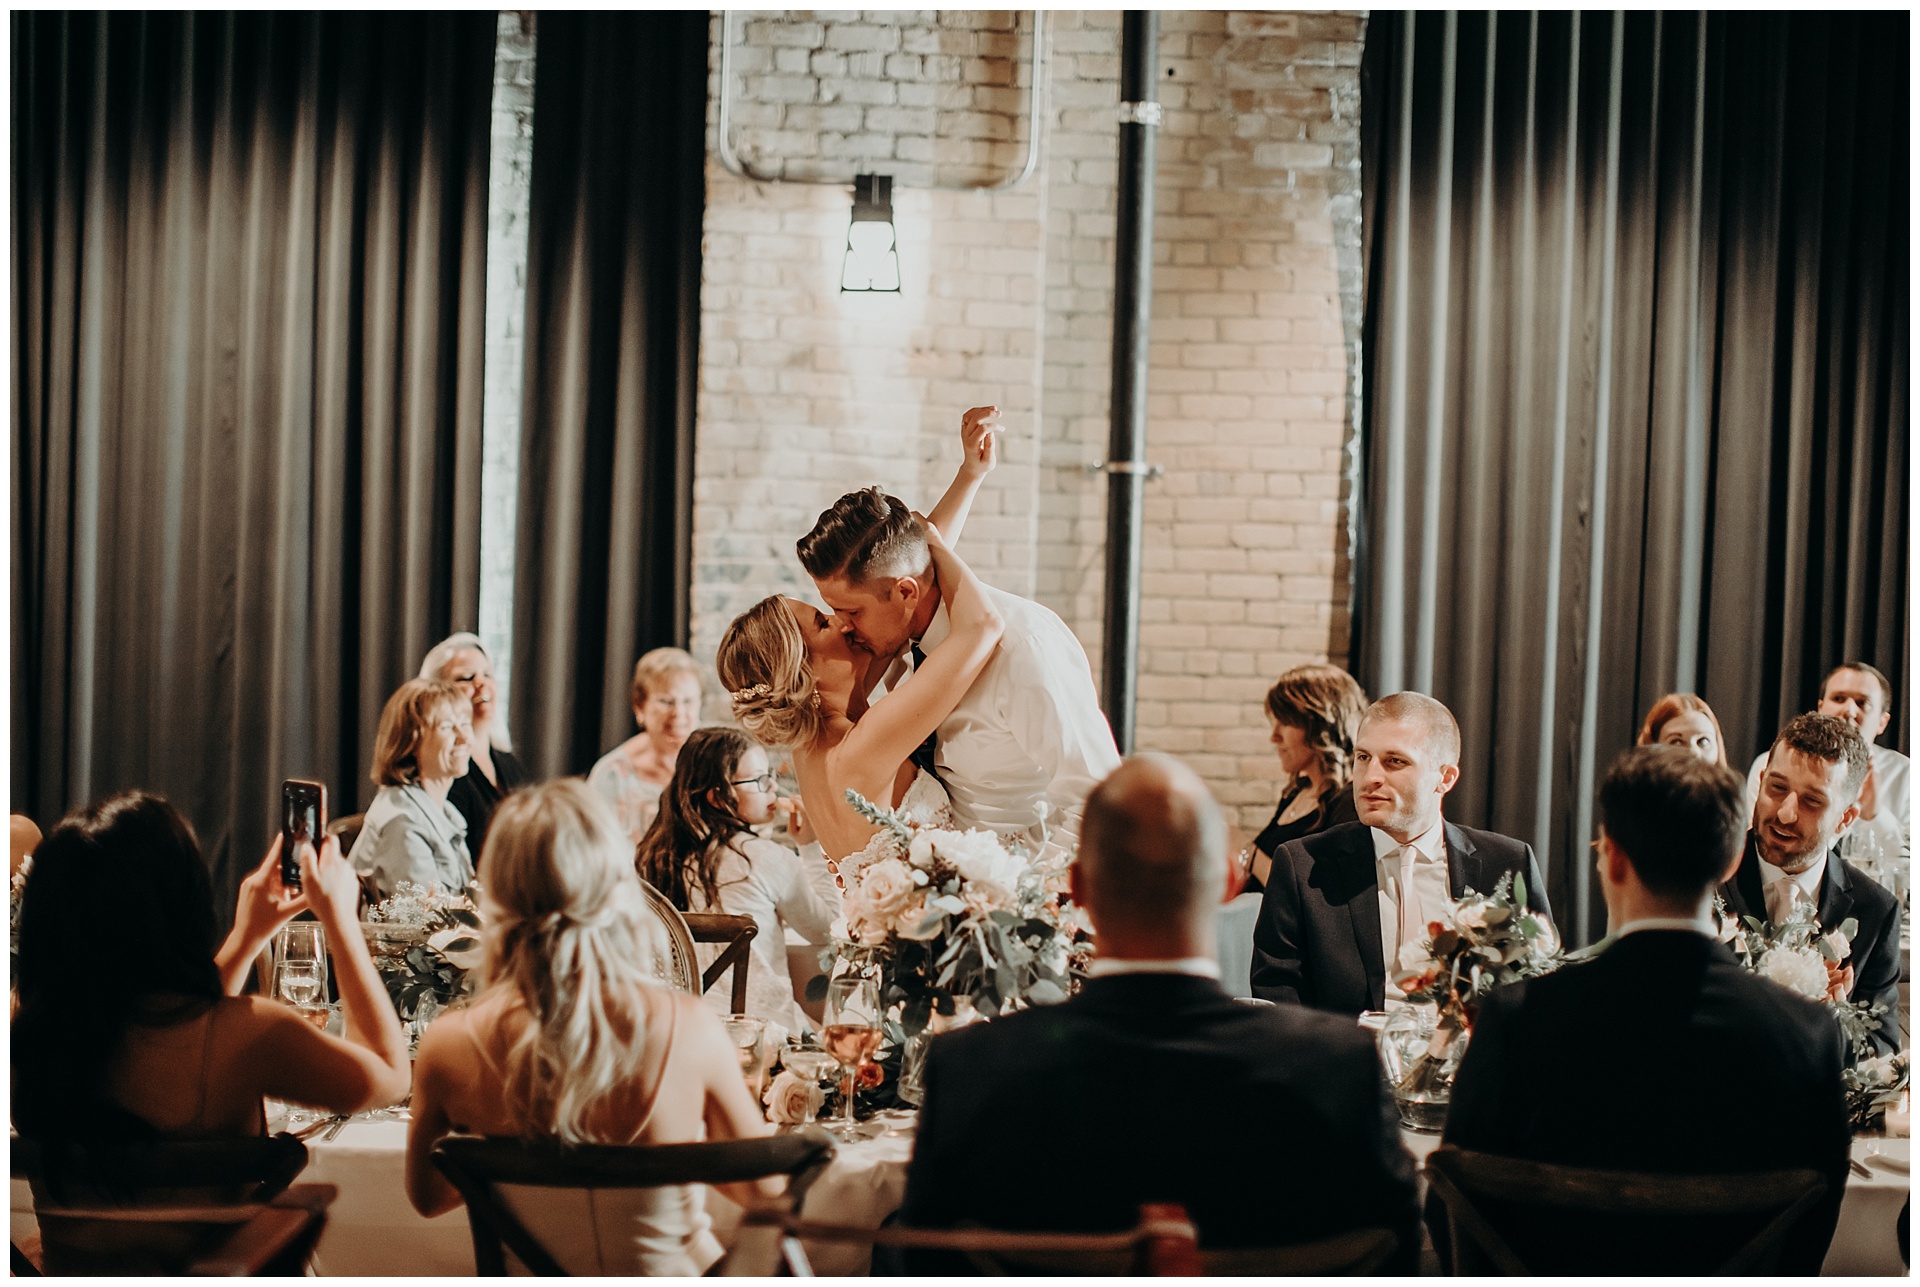 Wedding Reception at The Hewing Hotel